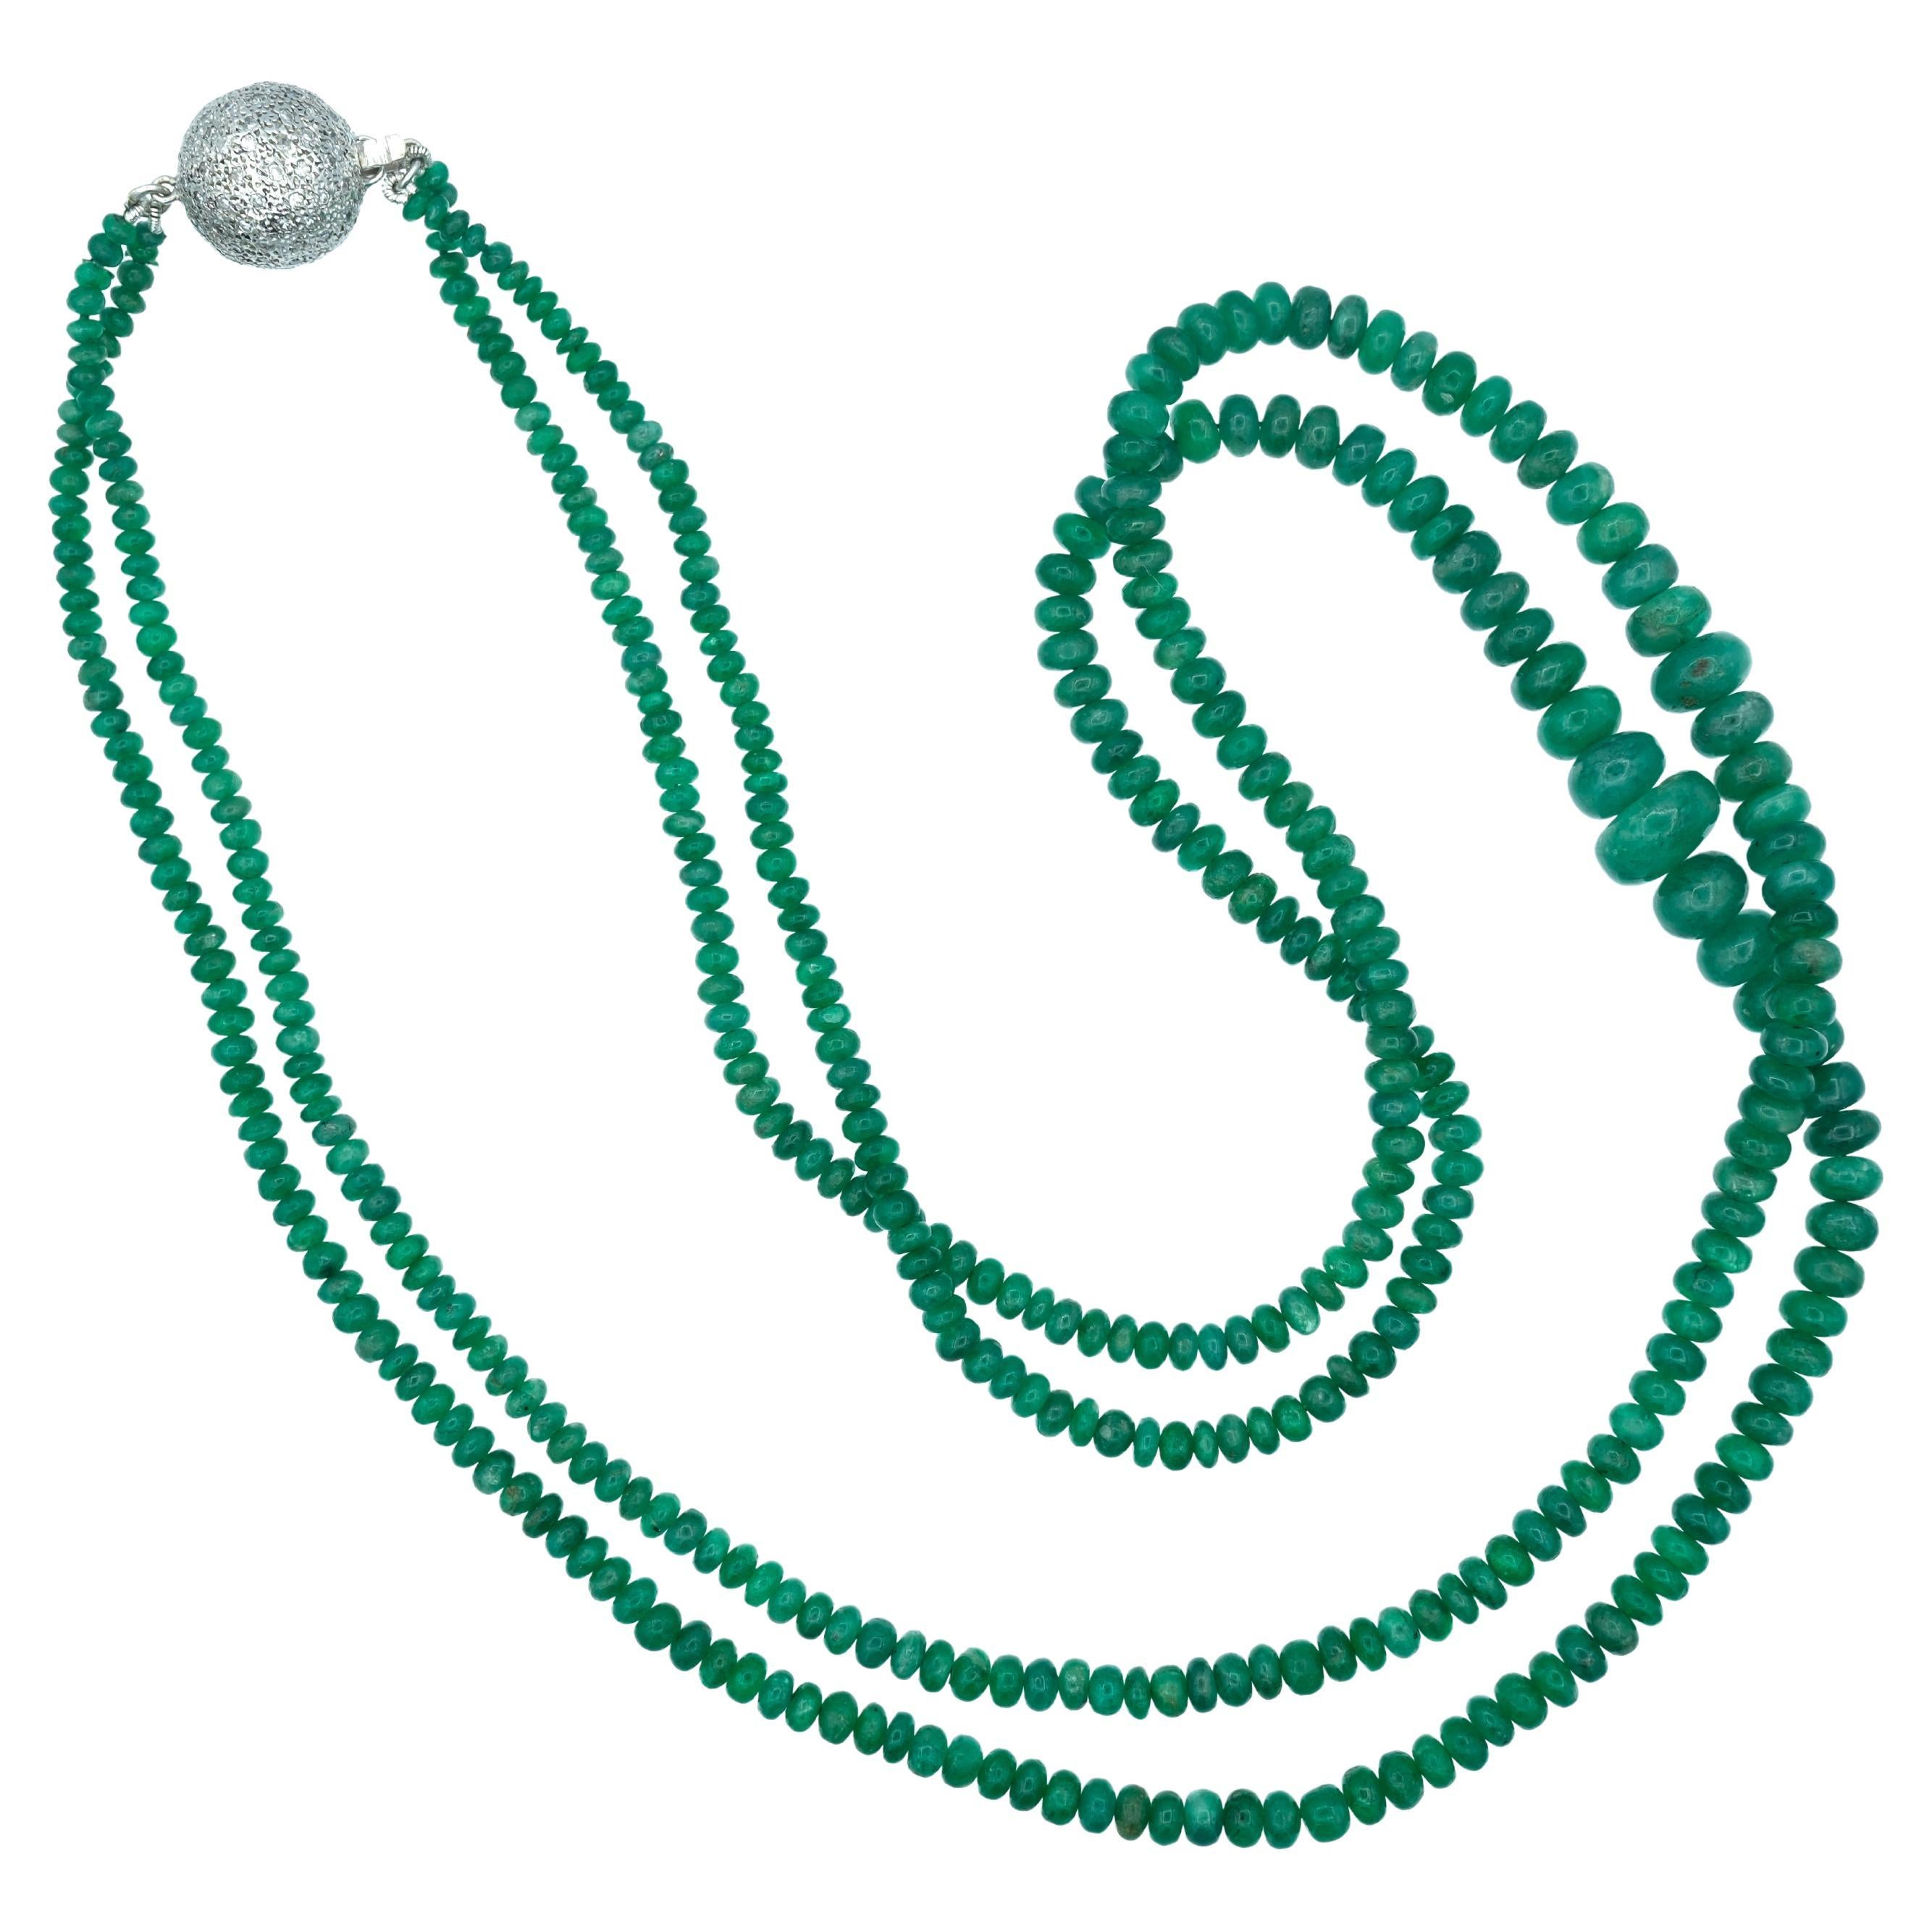 Beaded 125 Carats Emerald Necklace with 14 Karat White Gold Diamond Pendant For Sale